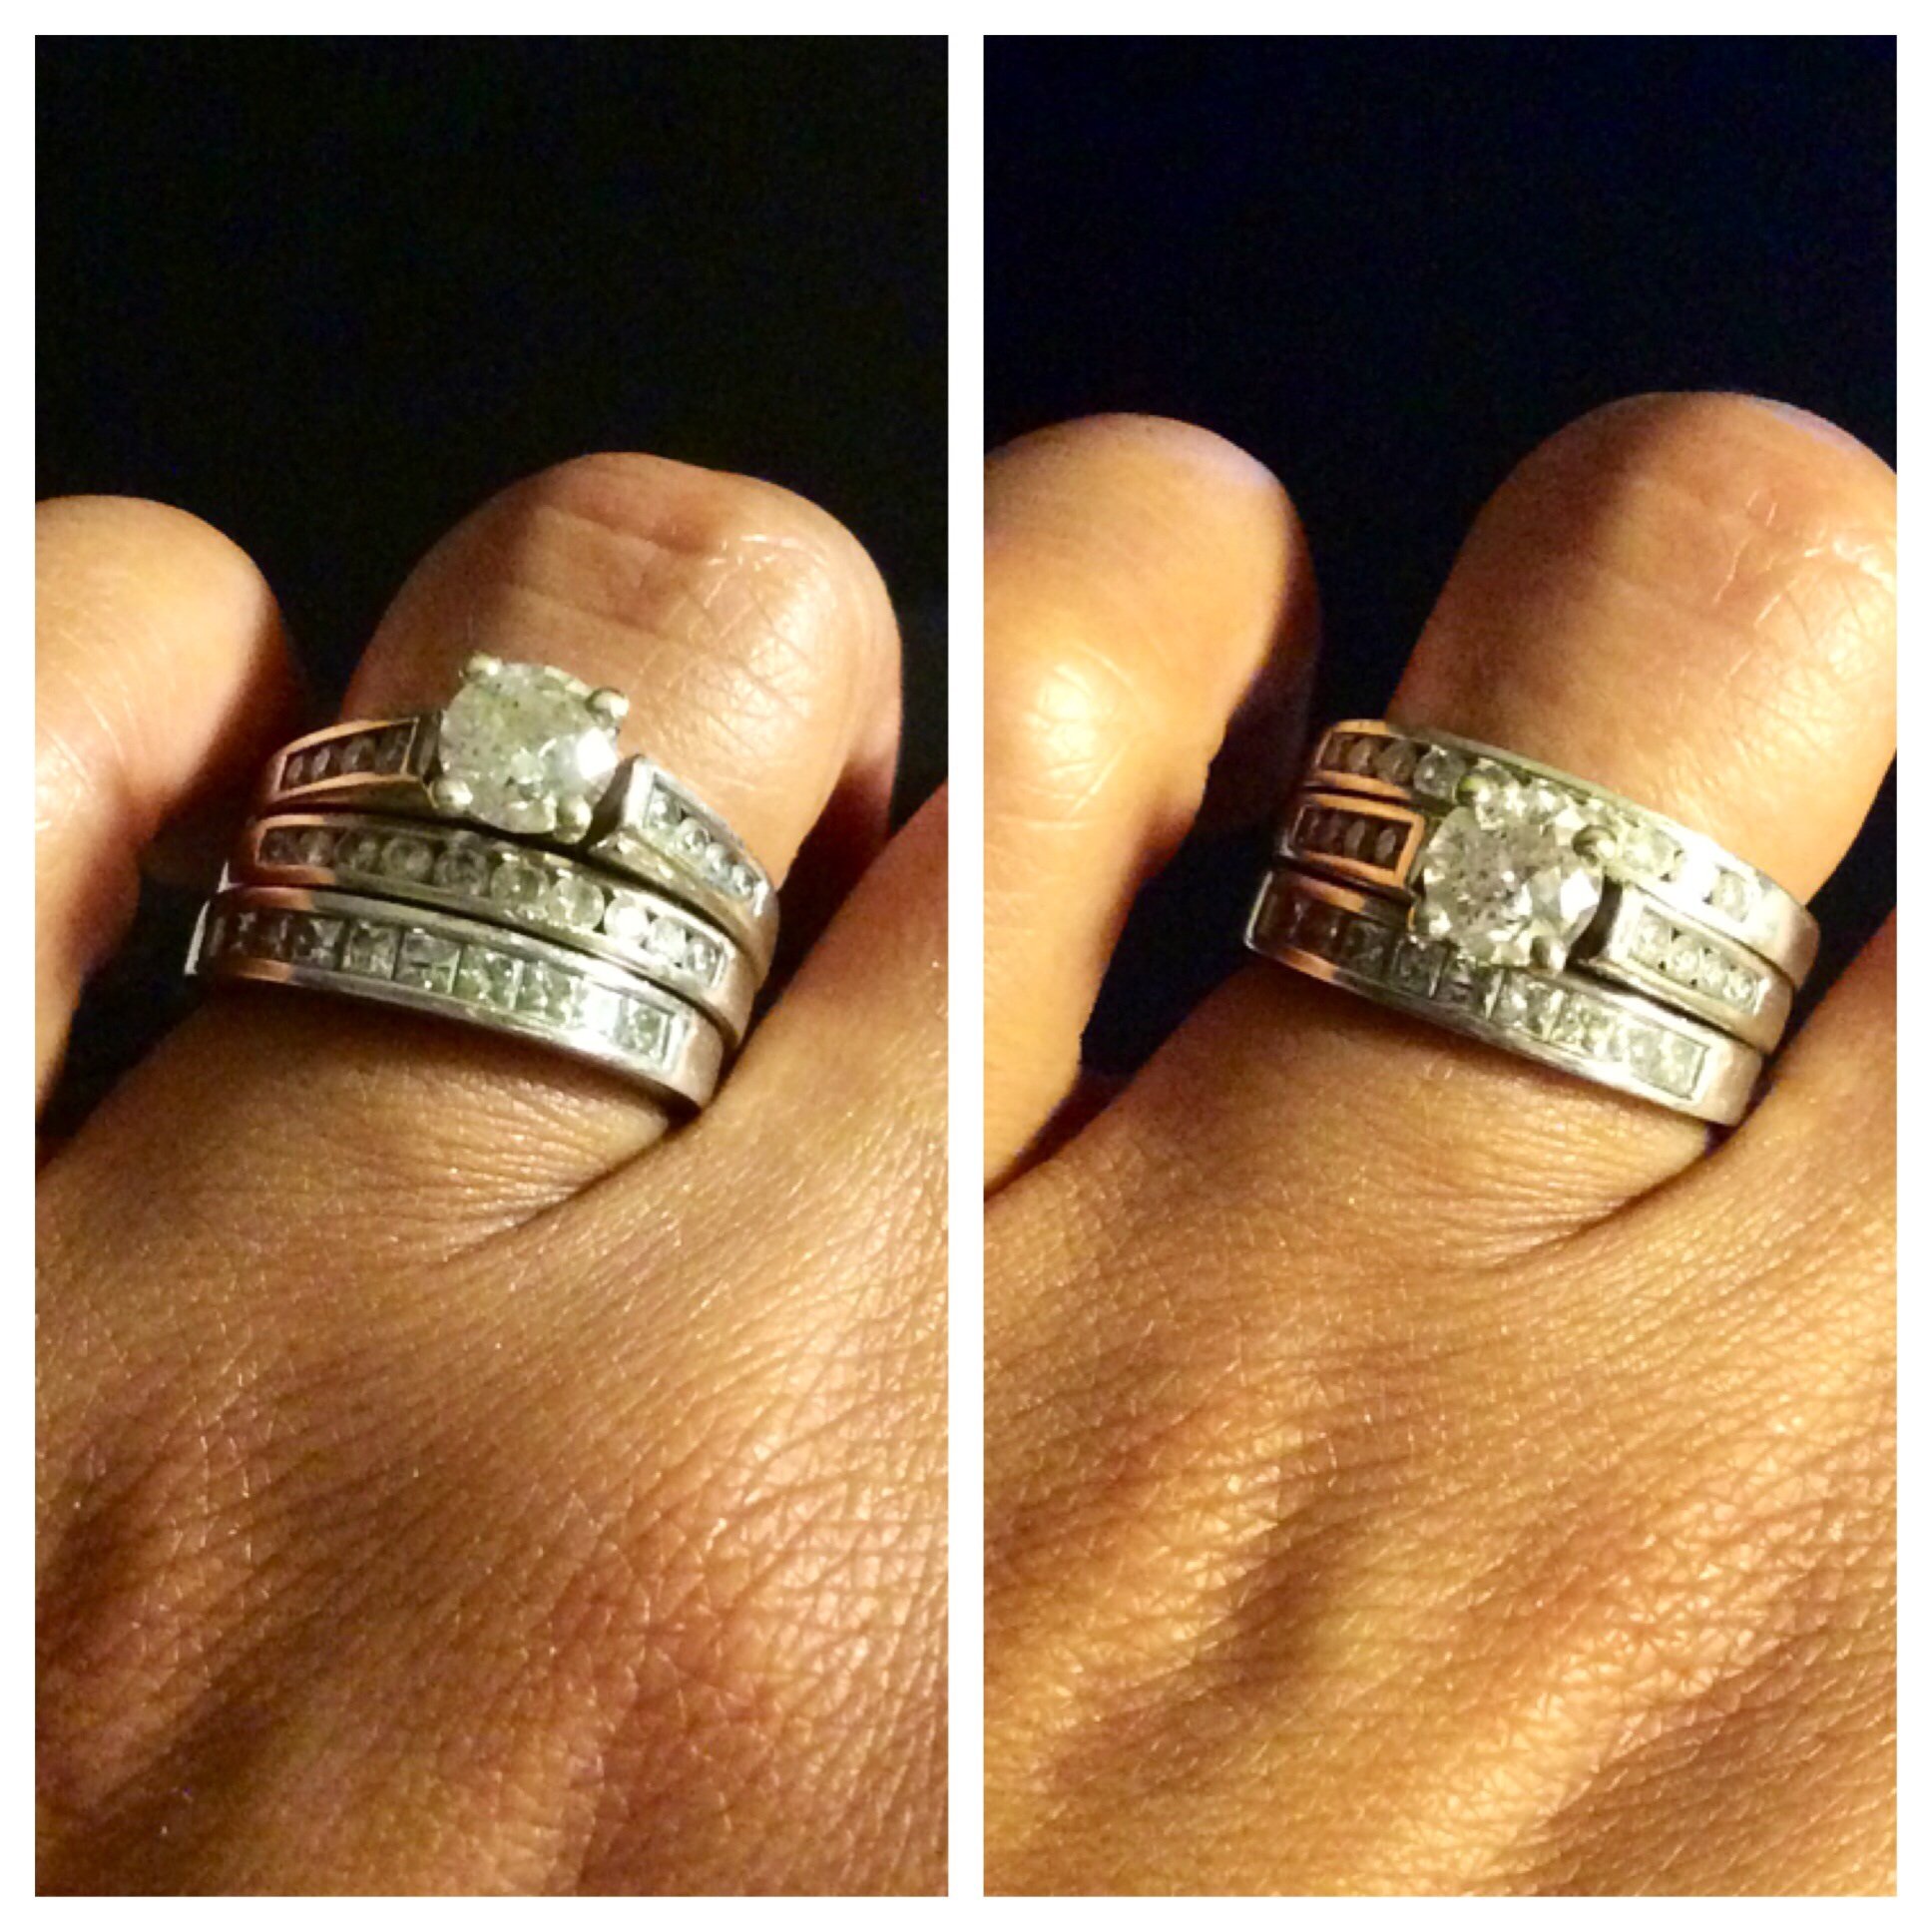 How do you wear your stacked rings?